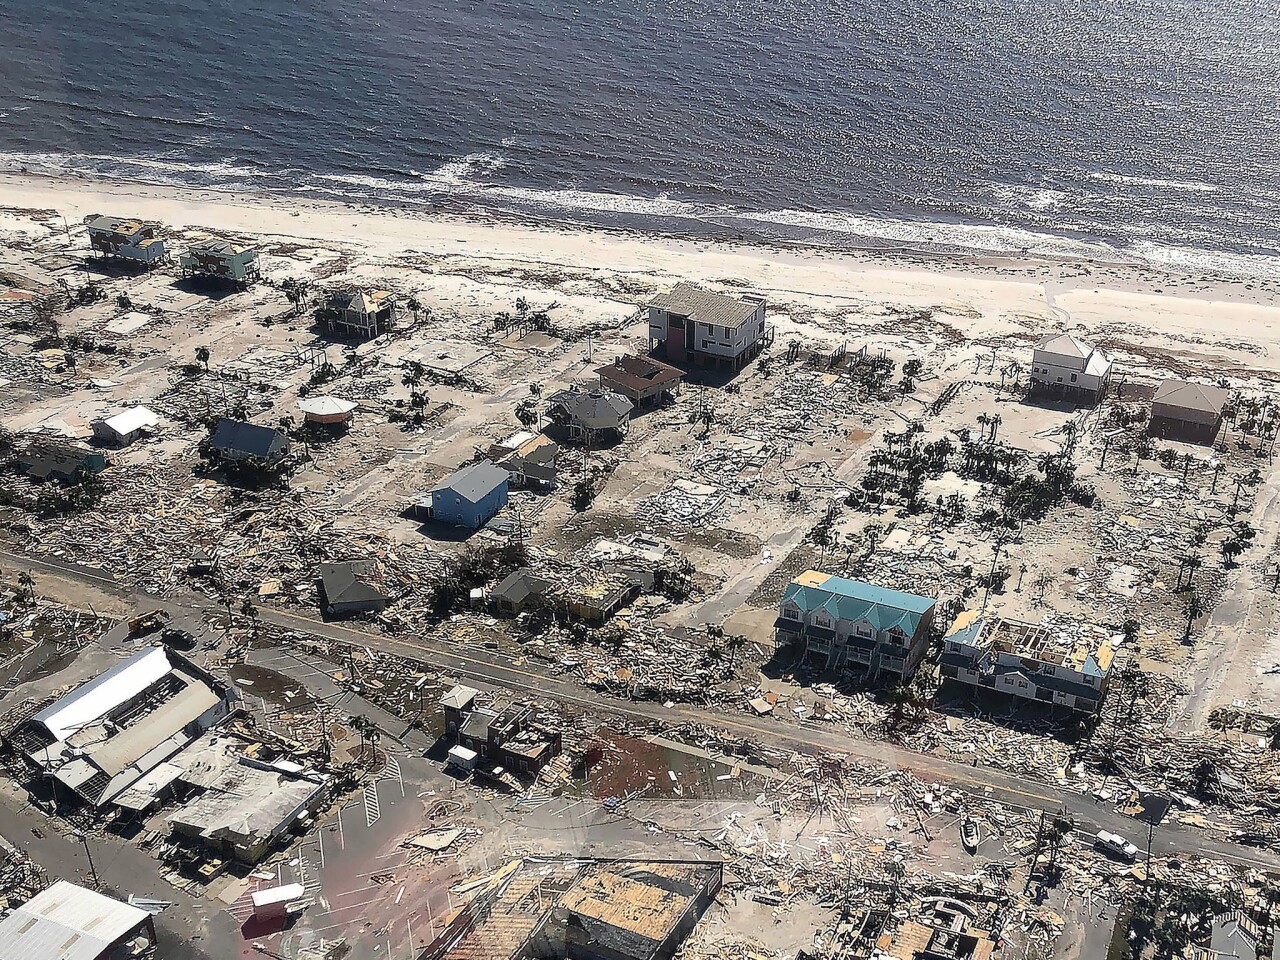 Aerial image of damage to homes and flooding after the arrival of Hurricane Michael in Mexico Beach, Fla.